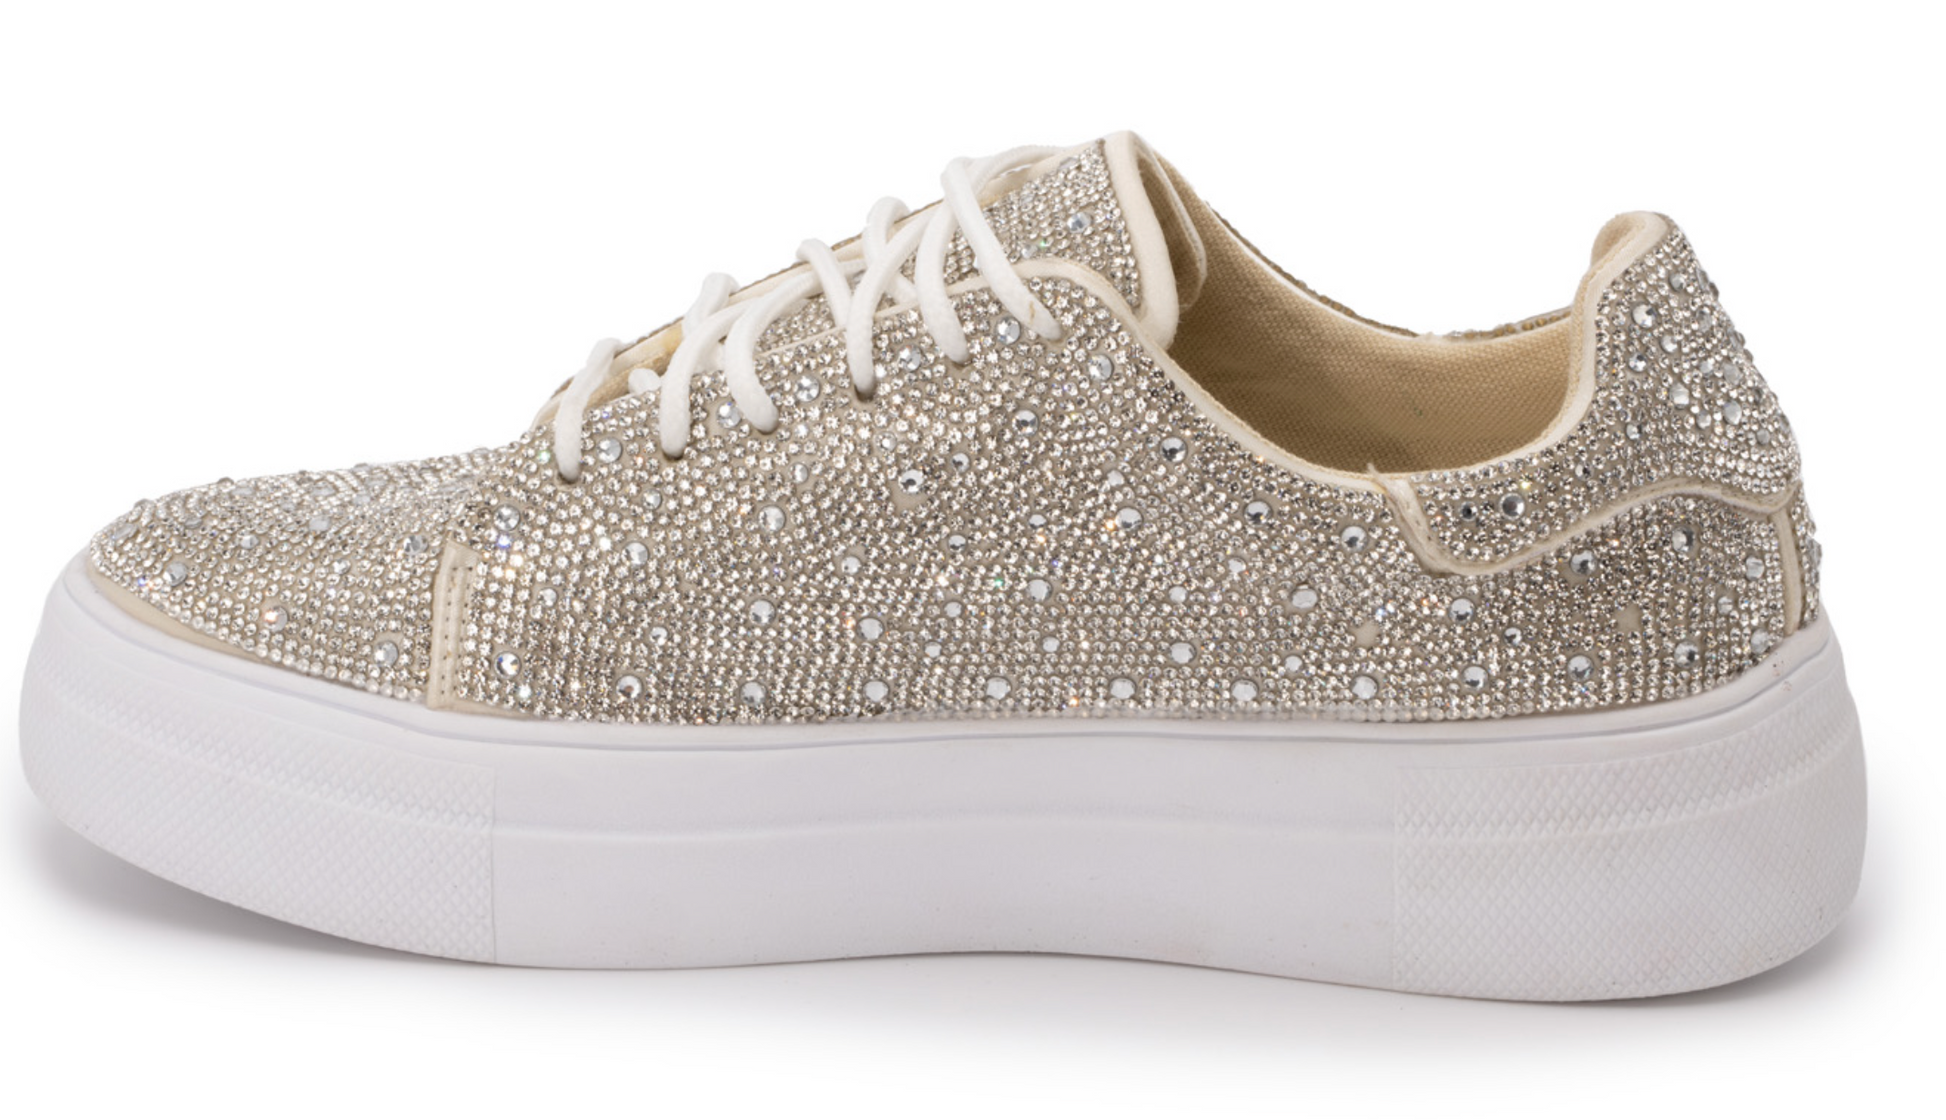 Bedazzle Gold Rhinestone Sneaks by Corky's 8